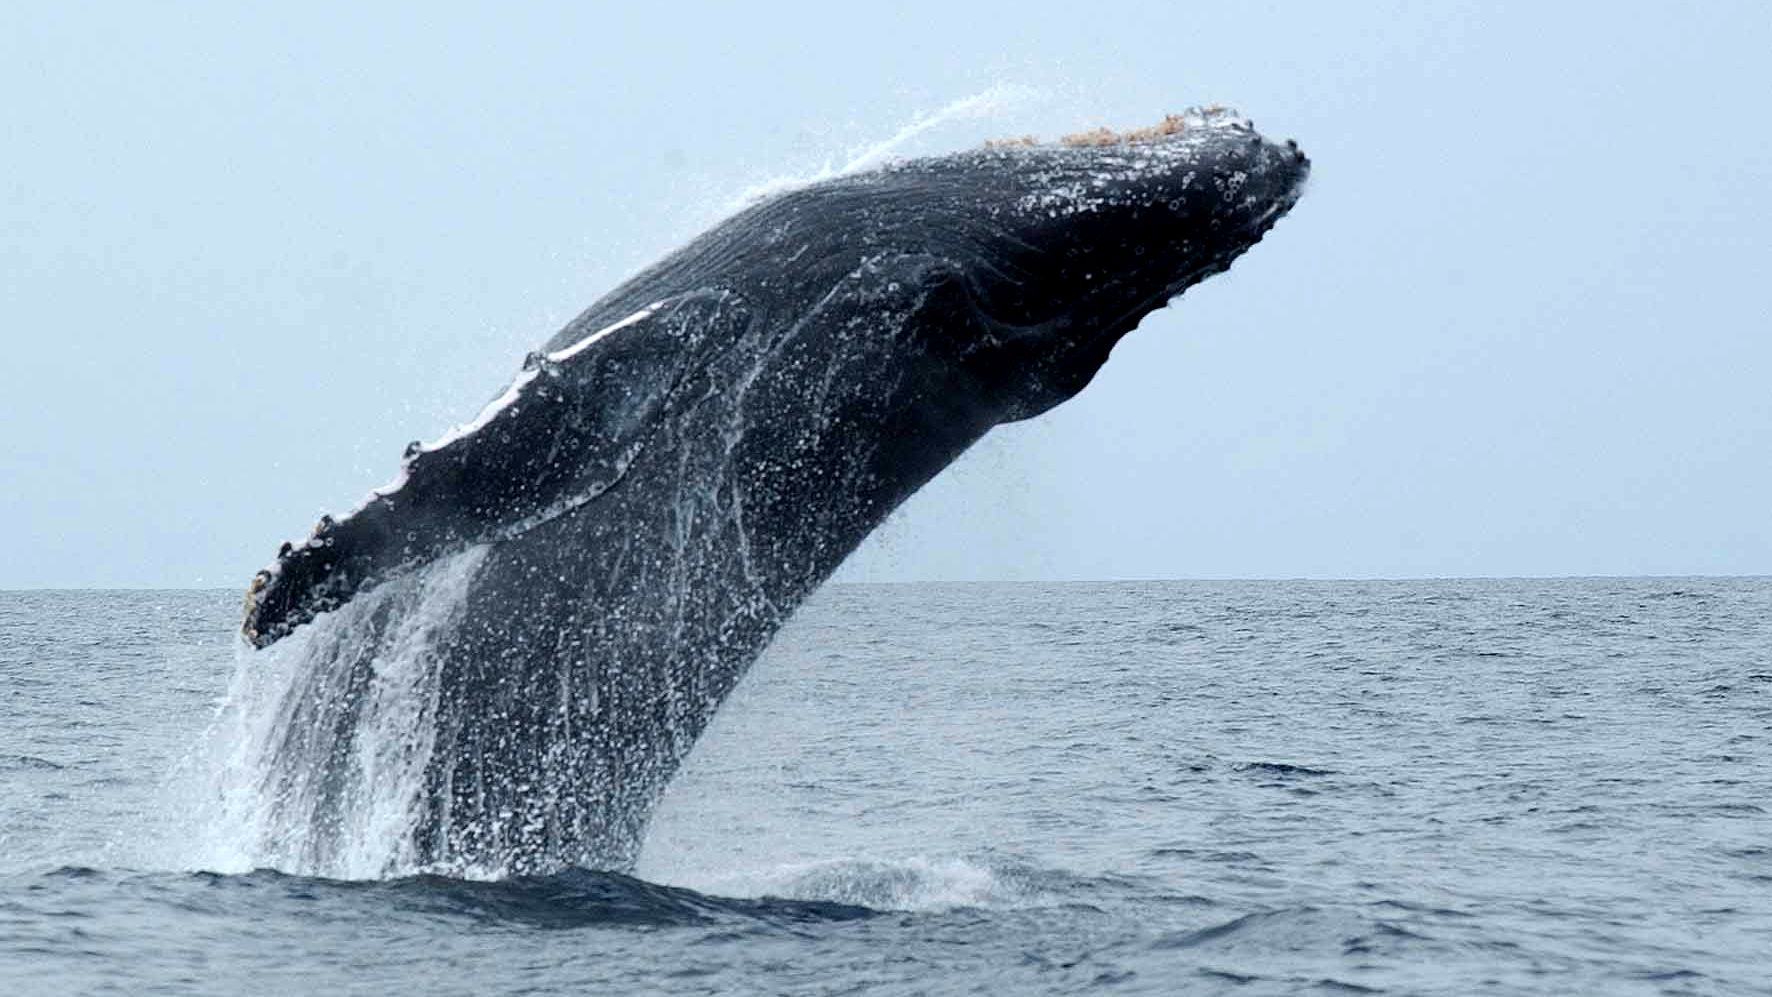 A humpback whale is soaring up from the water in the Indian Ocean